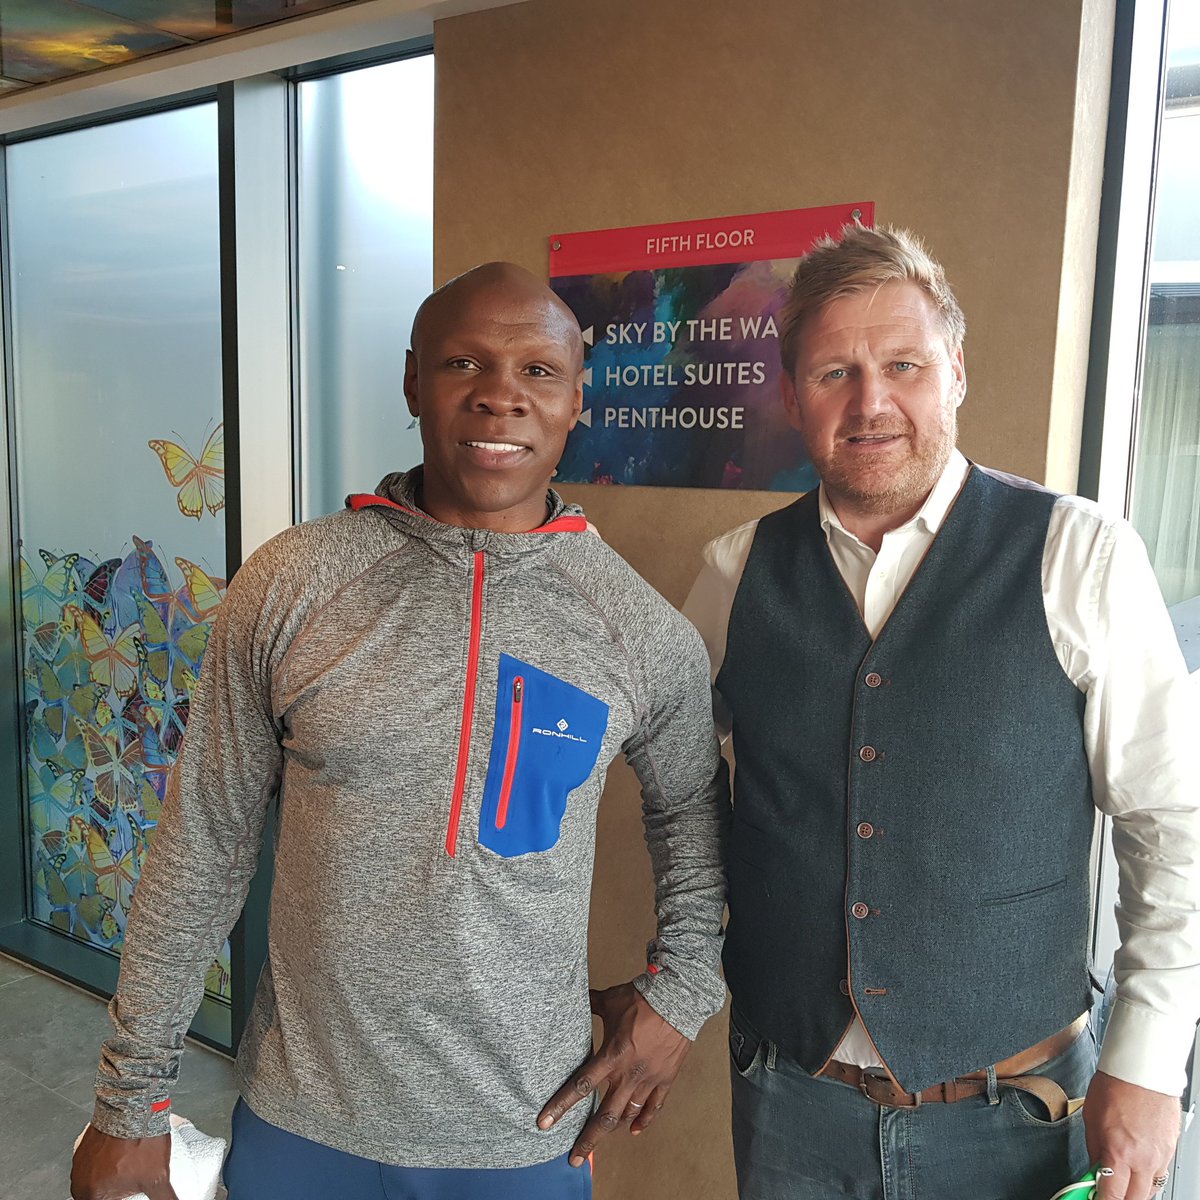 Off to the gym with my mate @ChrisEubank top chap....always loved his honesty! #LoveNG #IuseTerra #LoveChrisEubank